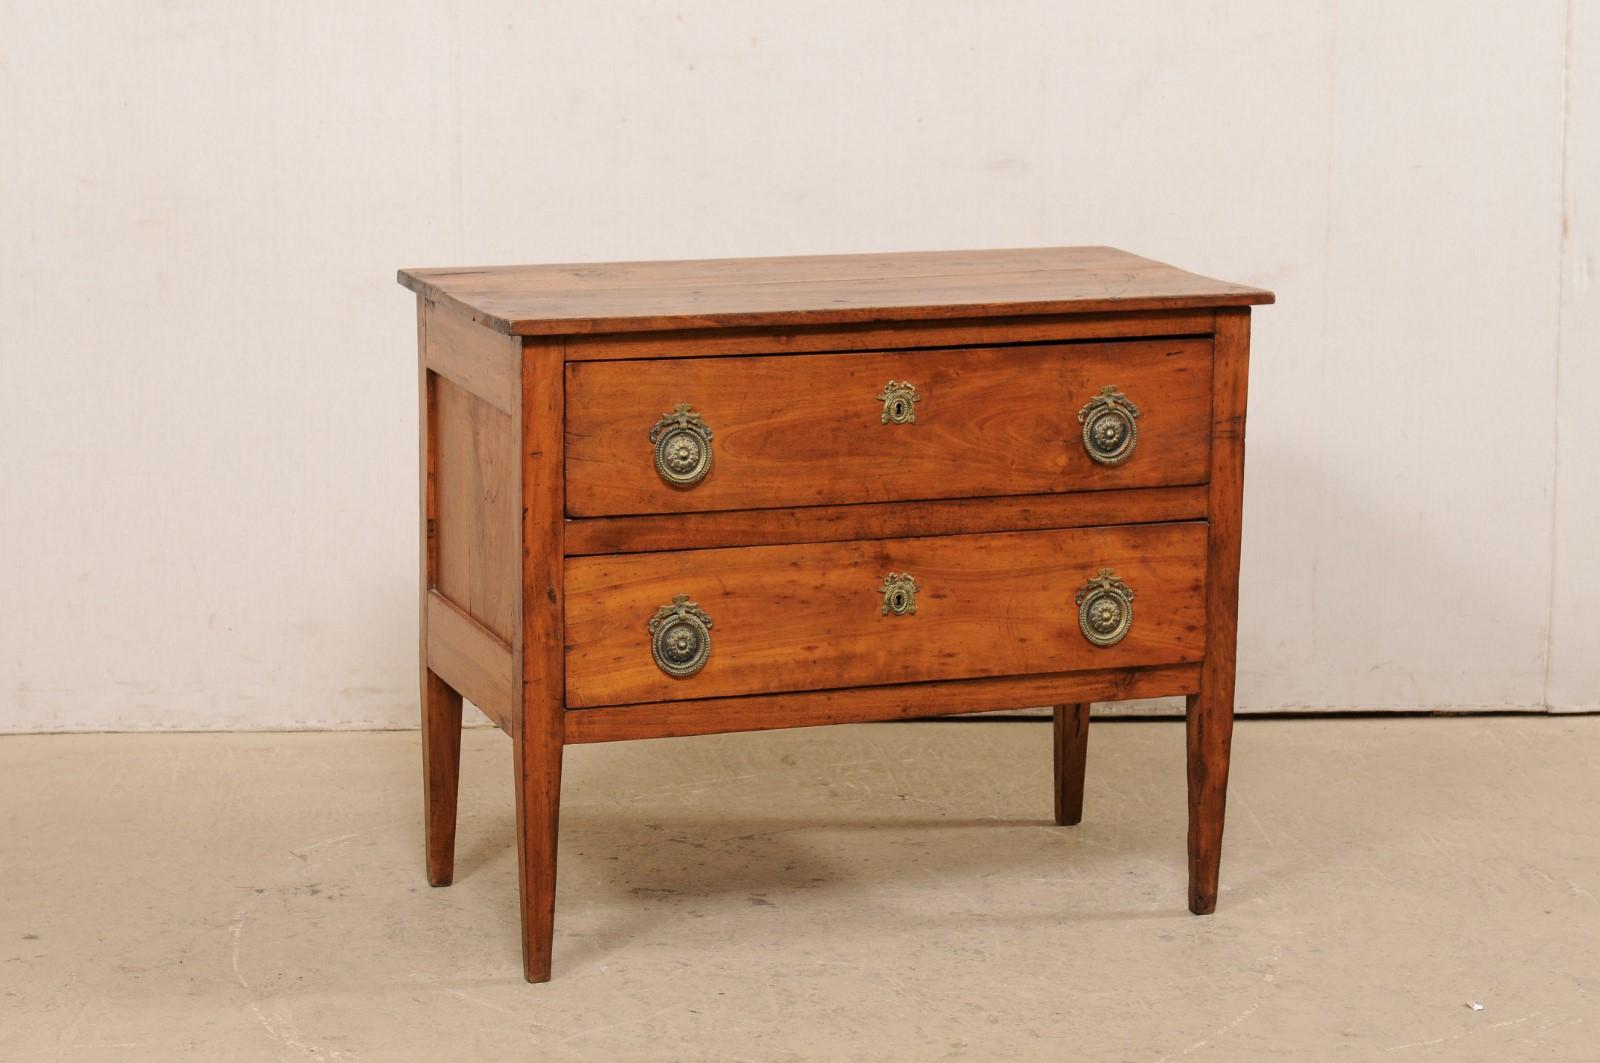 An Italian wood raised chest of two drawers from the turn of the 18th and 19th century. This antique cassettiera (chest of drawers) from Italy features a rectangular-shaped top, over a case which houses two full-sized drawers, designed in clean,